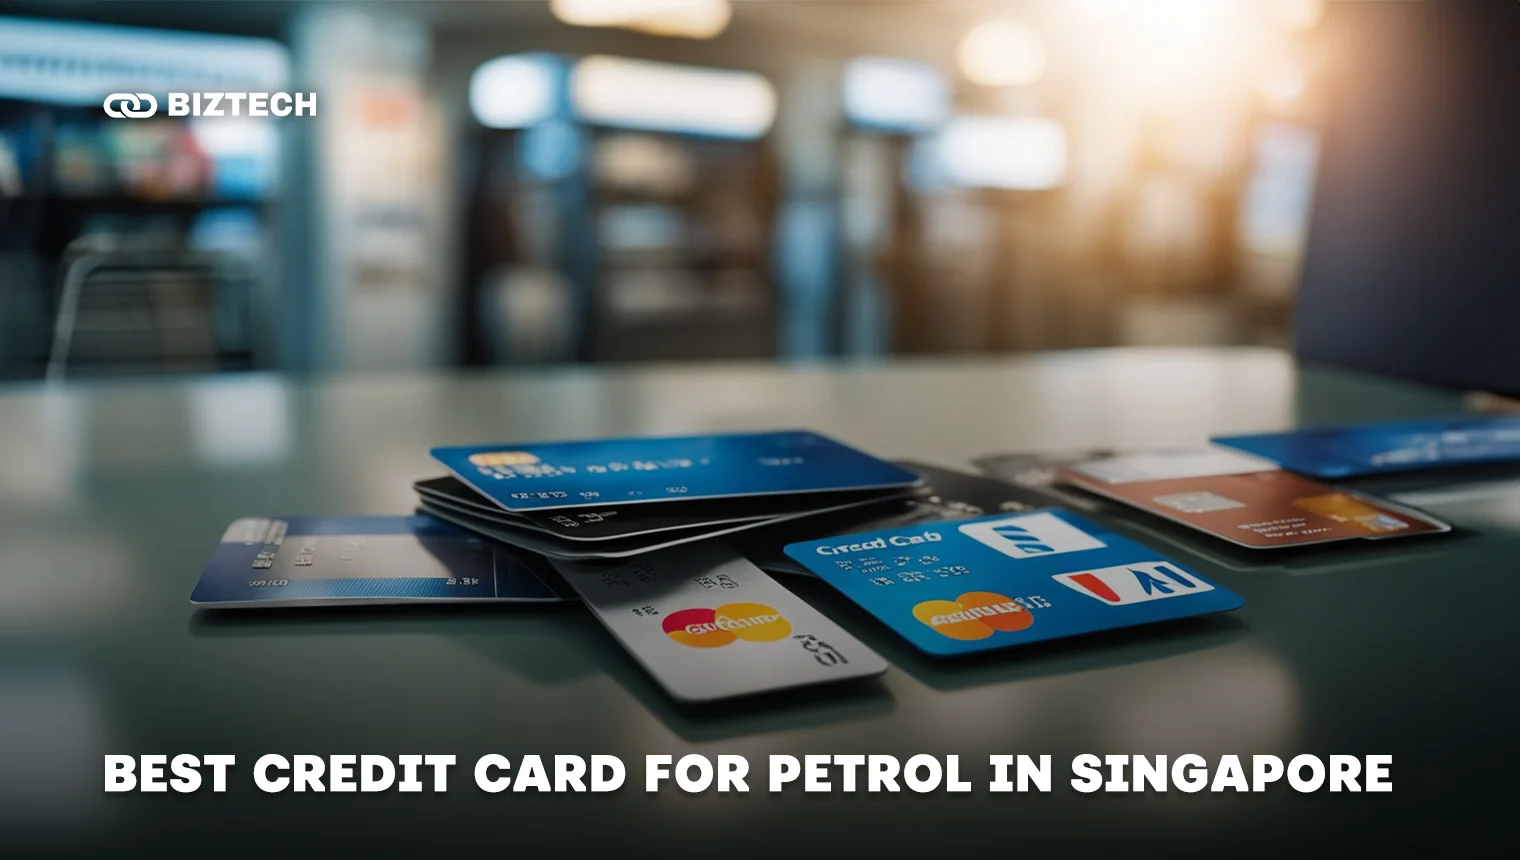 Best Credit Card For Petrol in Singapore